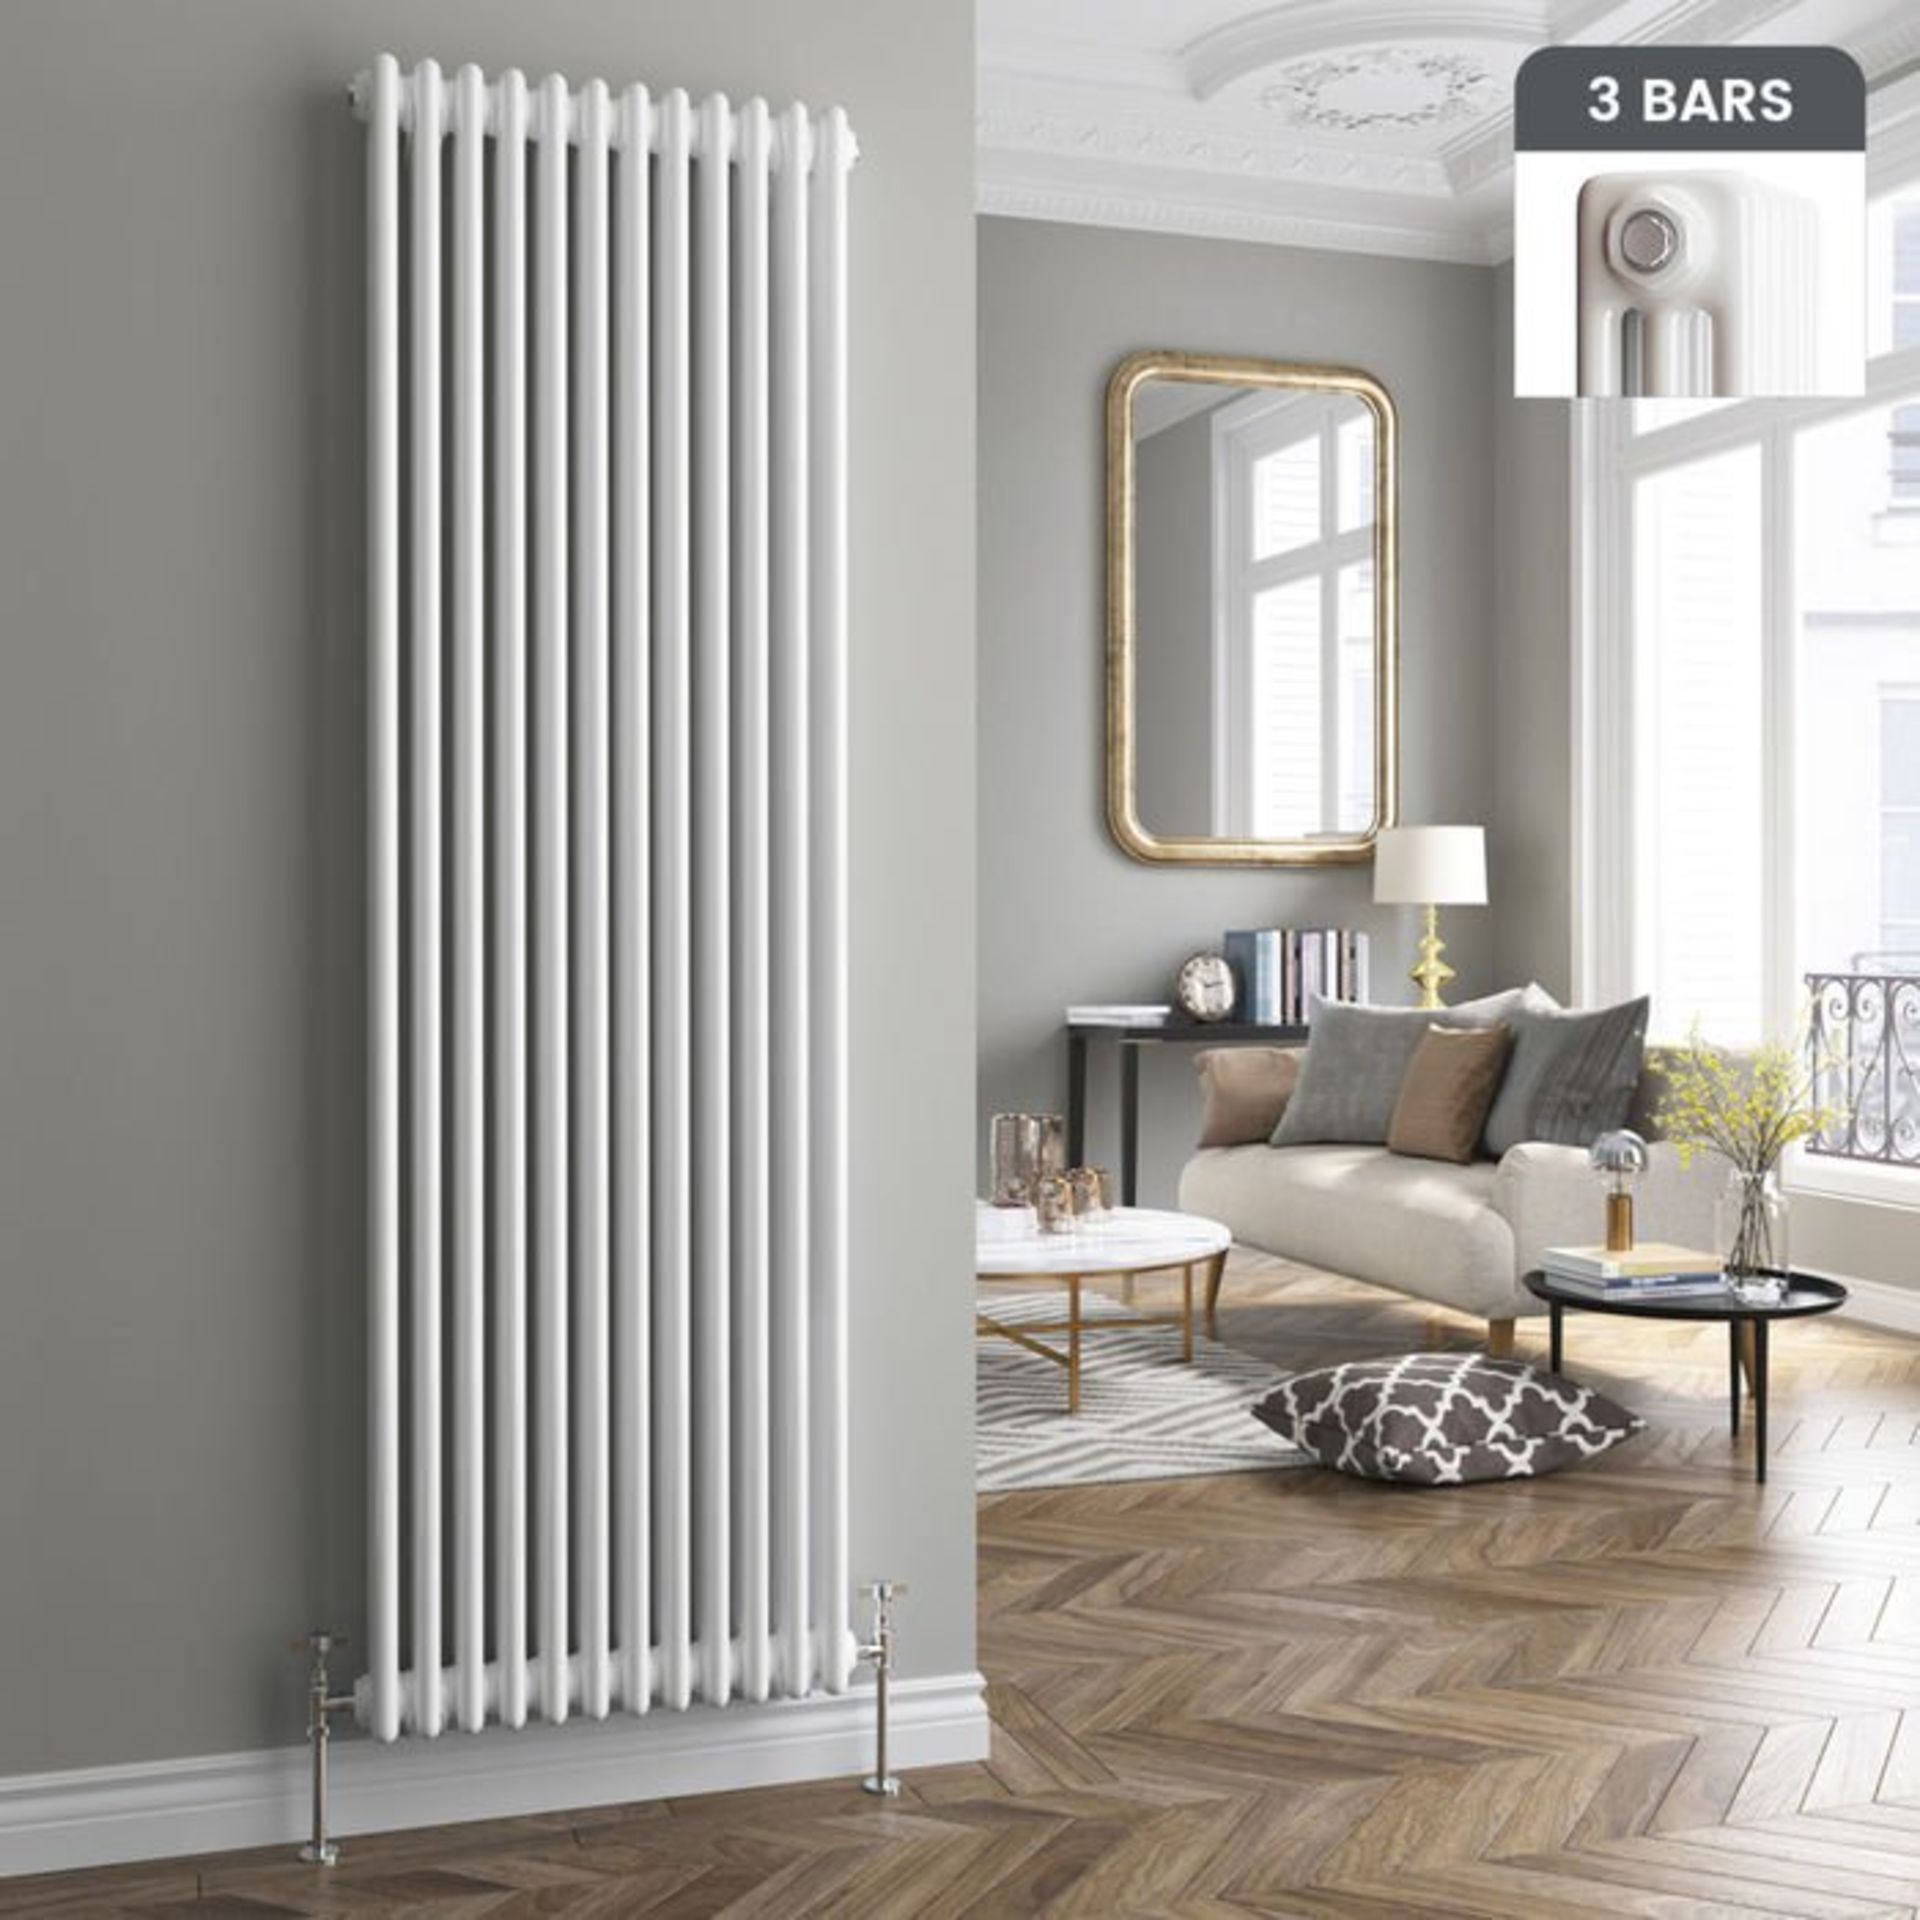 (L72) 1800x554mm White Triple Panel Vertical ColosseumTraditional Radiator. RRP £599.99. Low